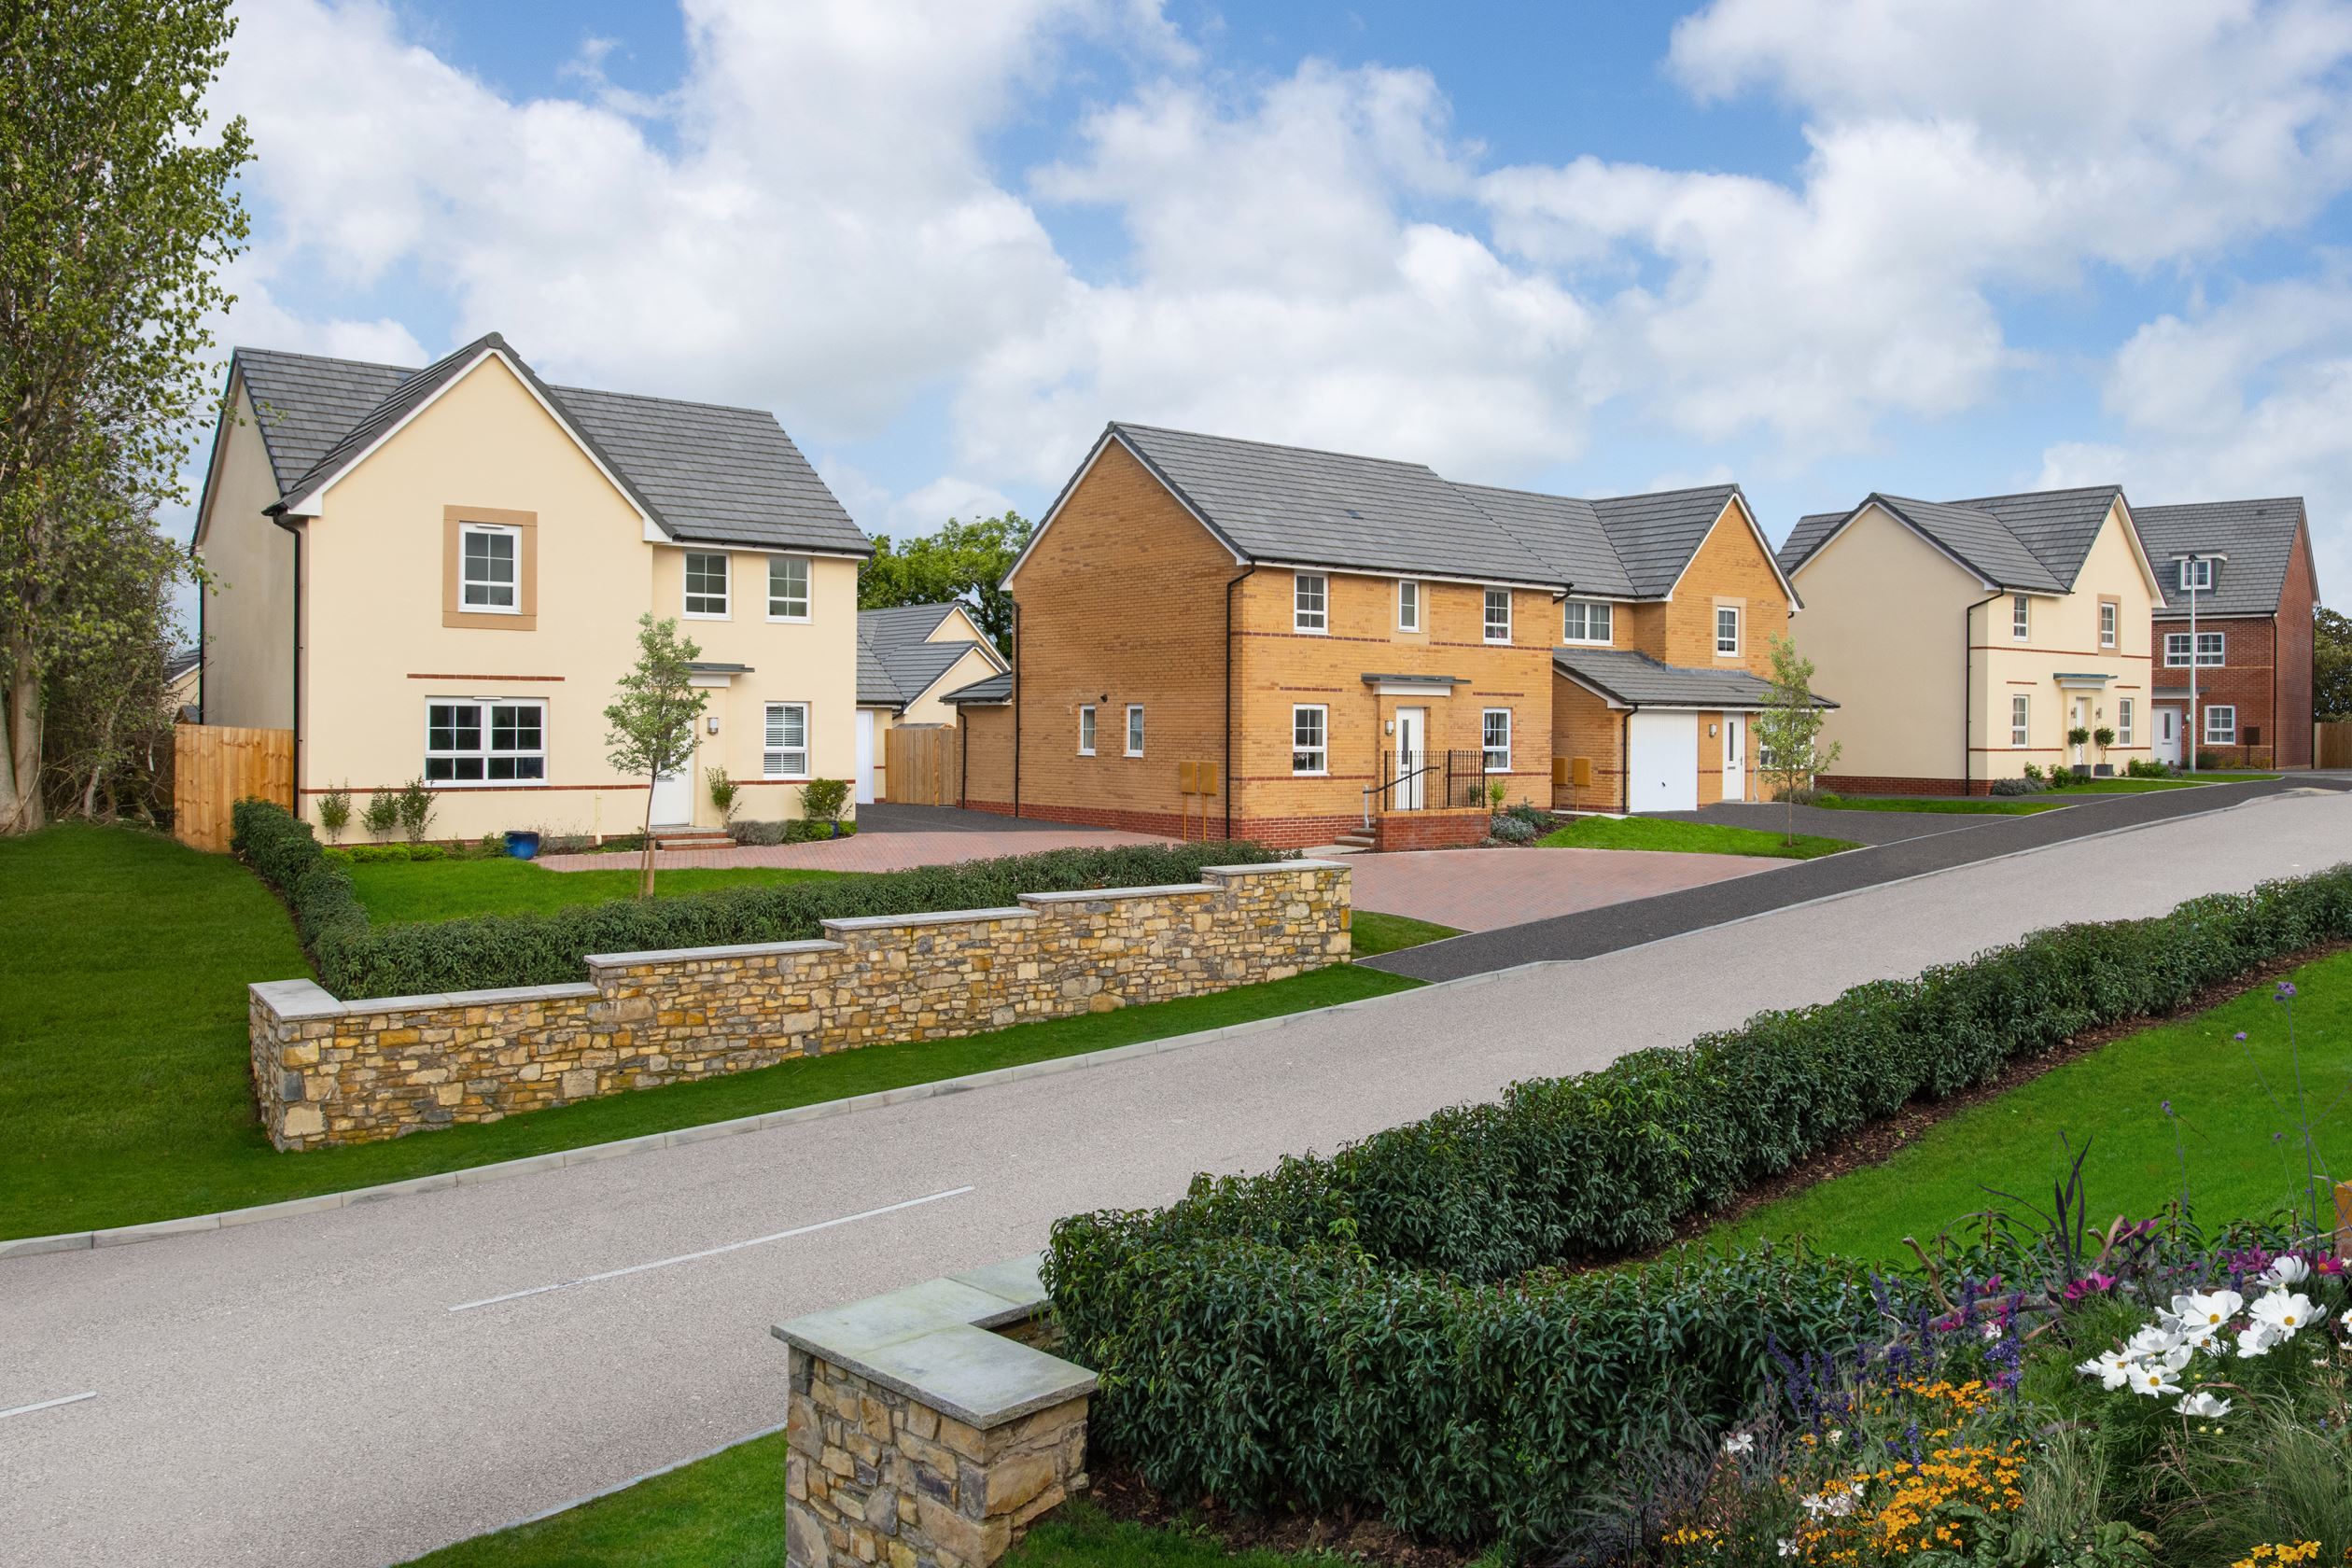 New Build Homes For Sale In Neath Wales Barratt Homes